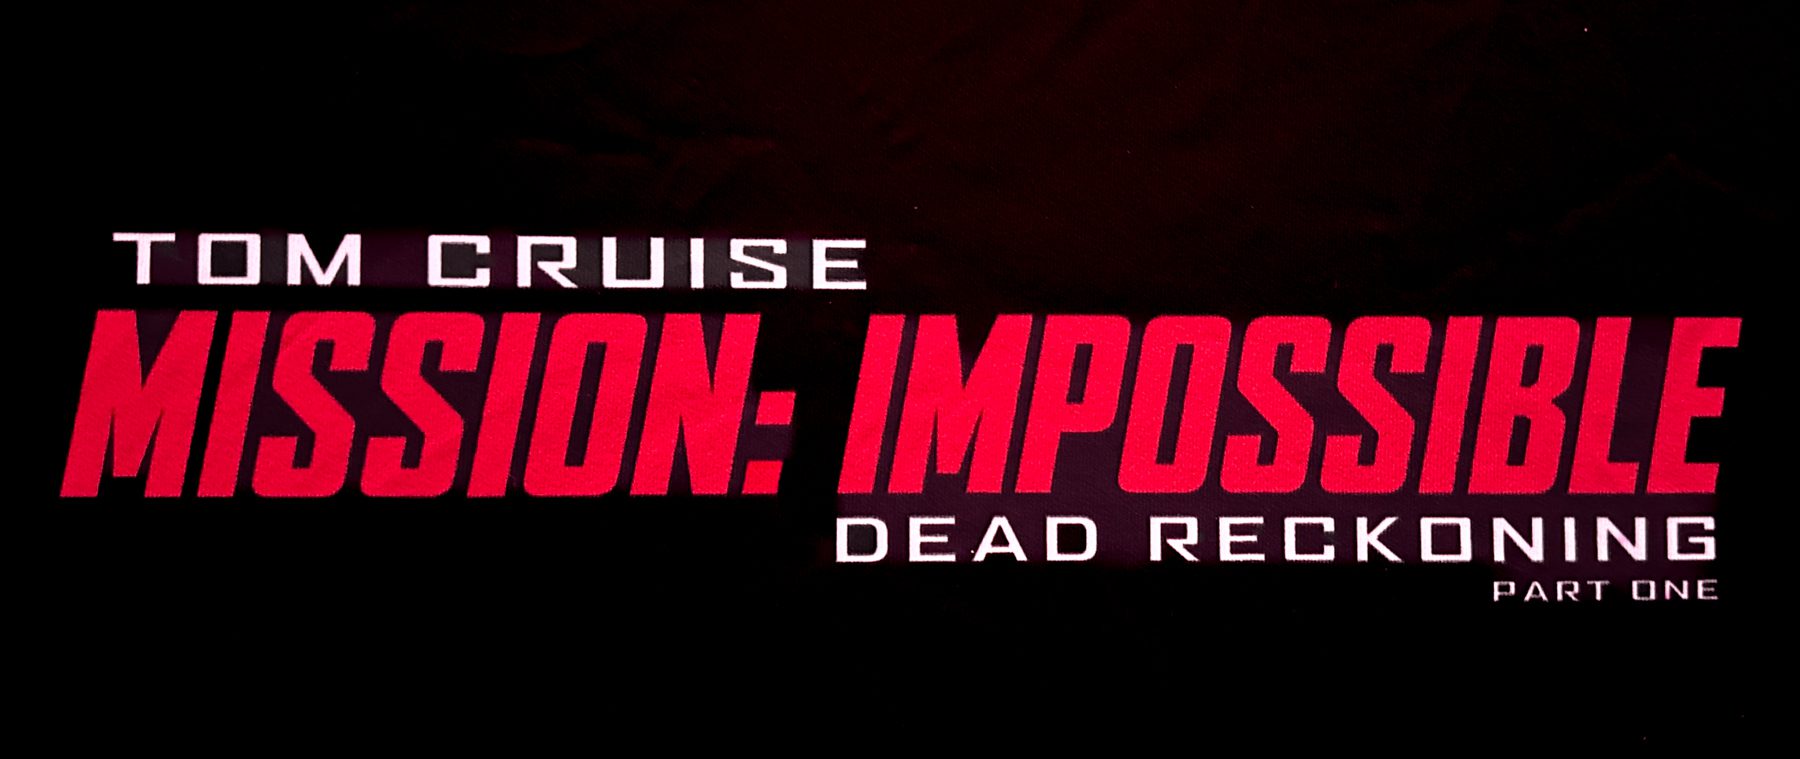 c J Wagner-20230706_215716-02194-Studio-supplied media assets & my own for movie—Mission Impossible—Dead Reckoning-Part One-iPh14PM-8049—6in x 300dpi